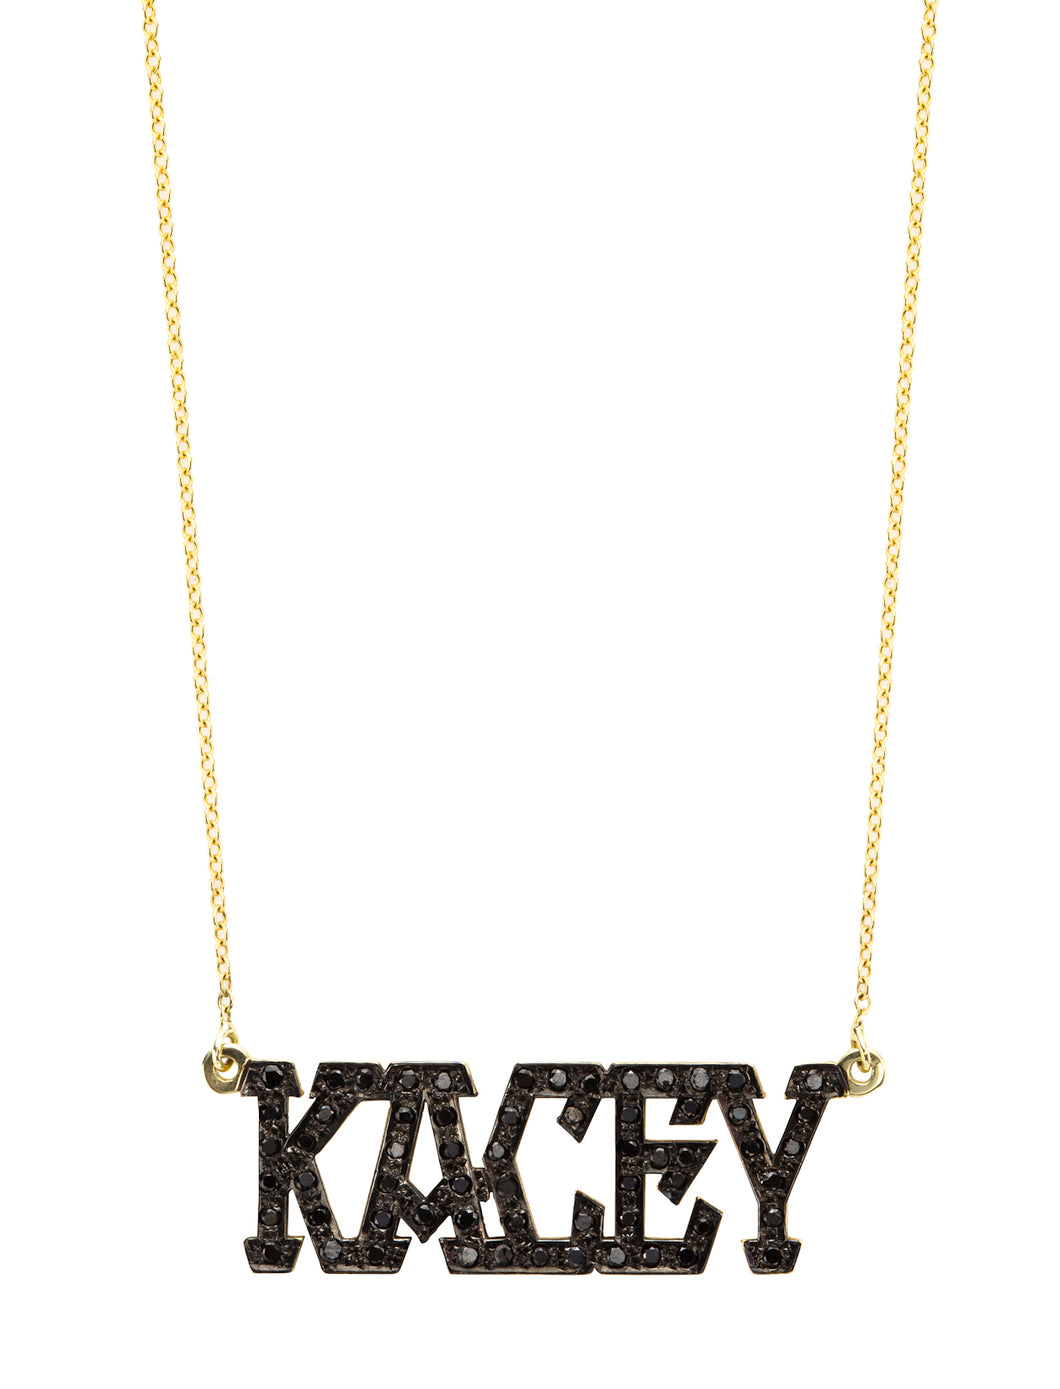 Nameplate Gothic Block Letter | Kacey K Jewelry.